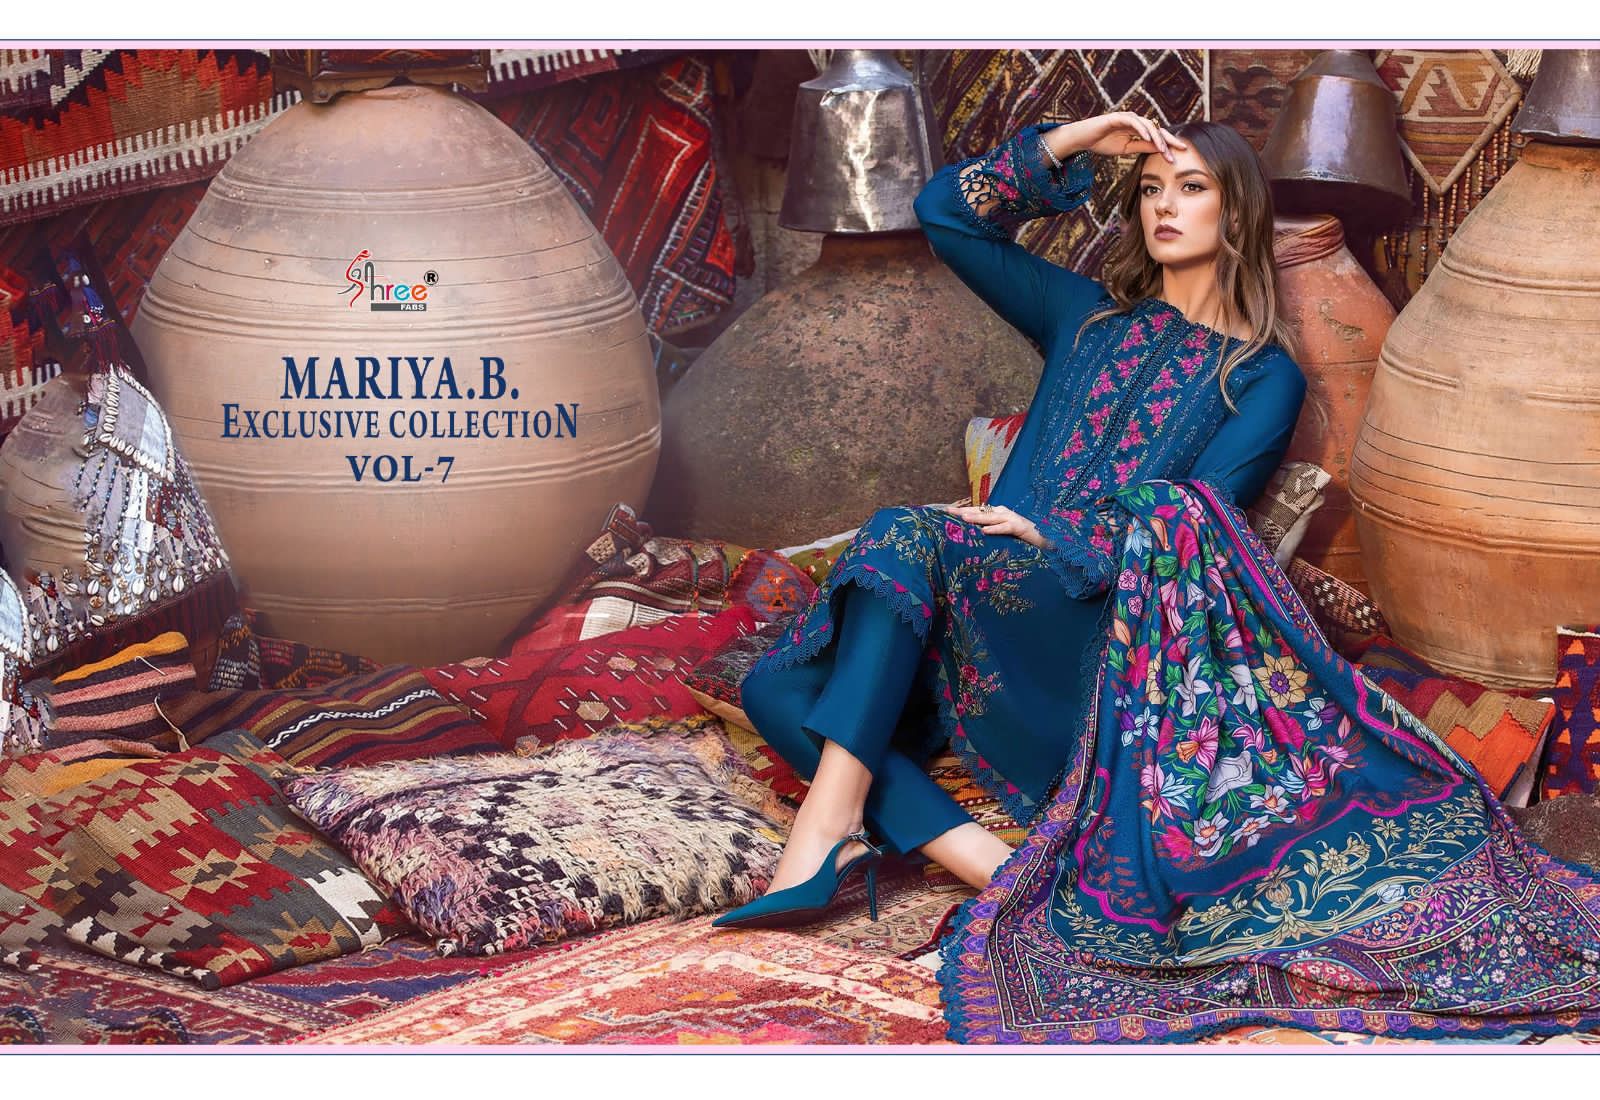 Shree Fabs Maria B Exclusive Collection Vol 7 rayon with embroidery work Chiffon Dupatta pakistani suits online india - jilaniwholesalesuit